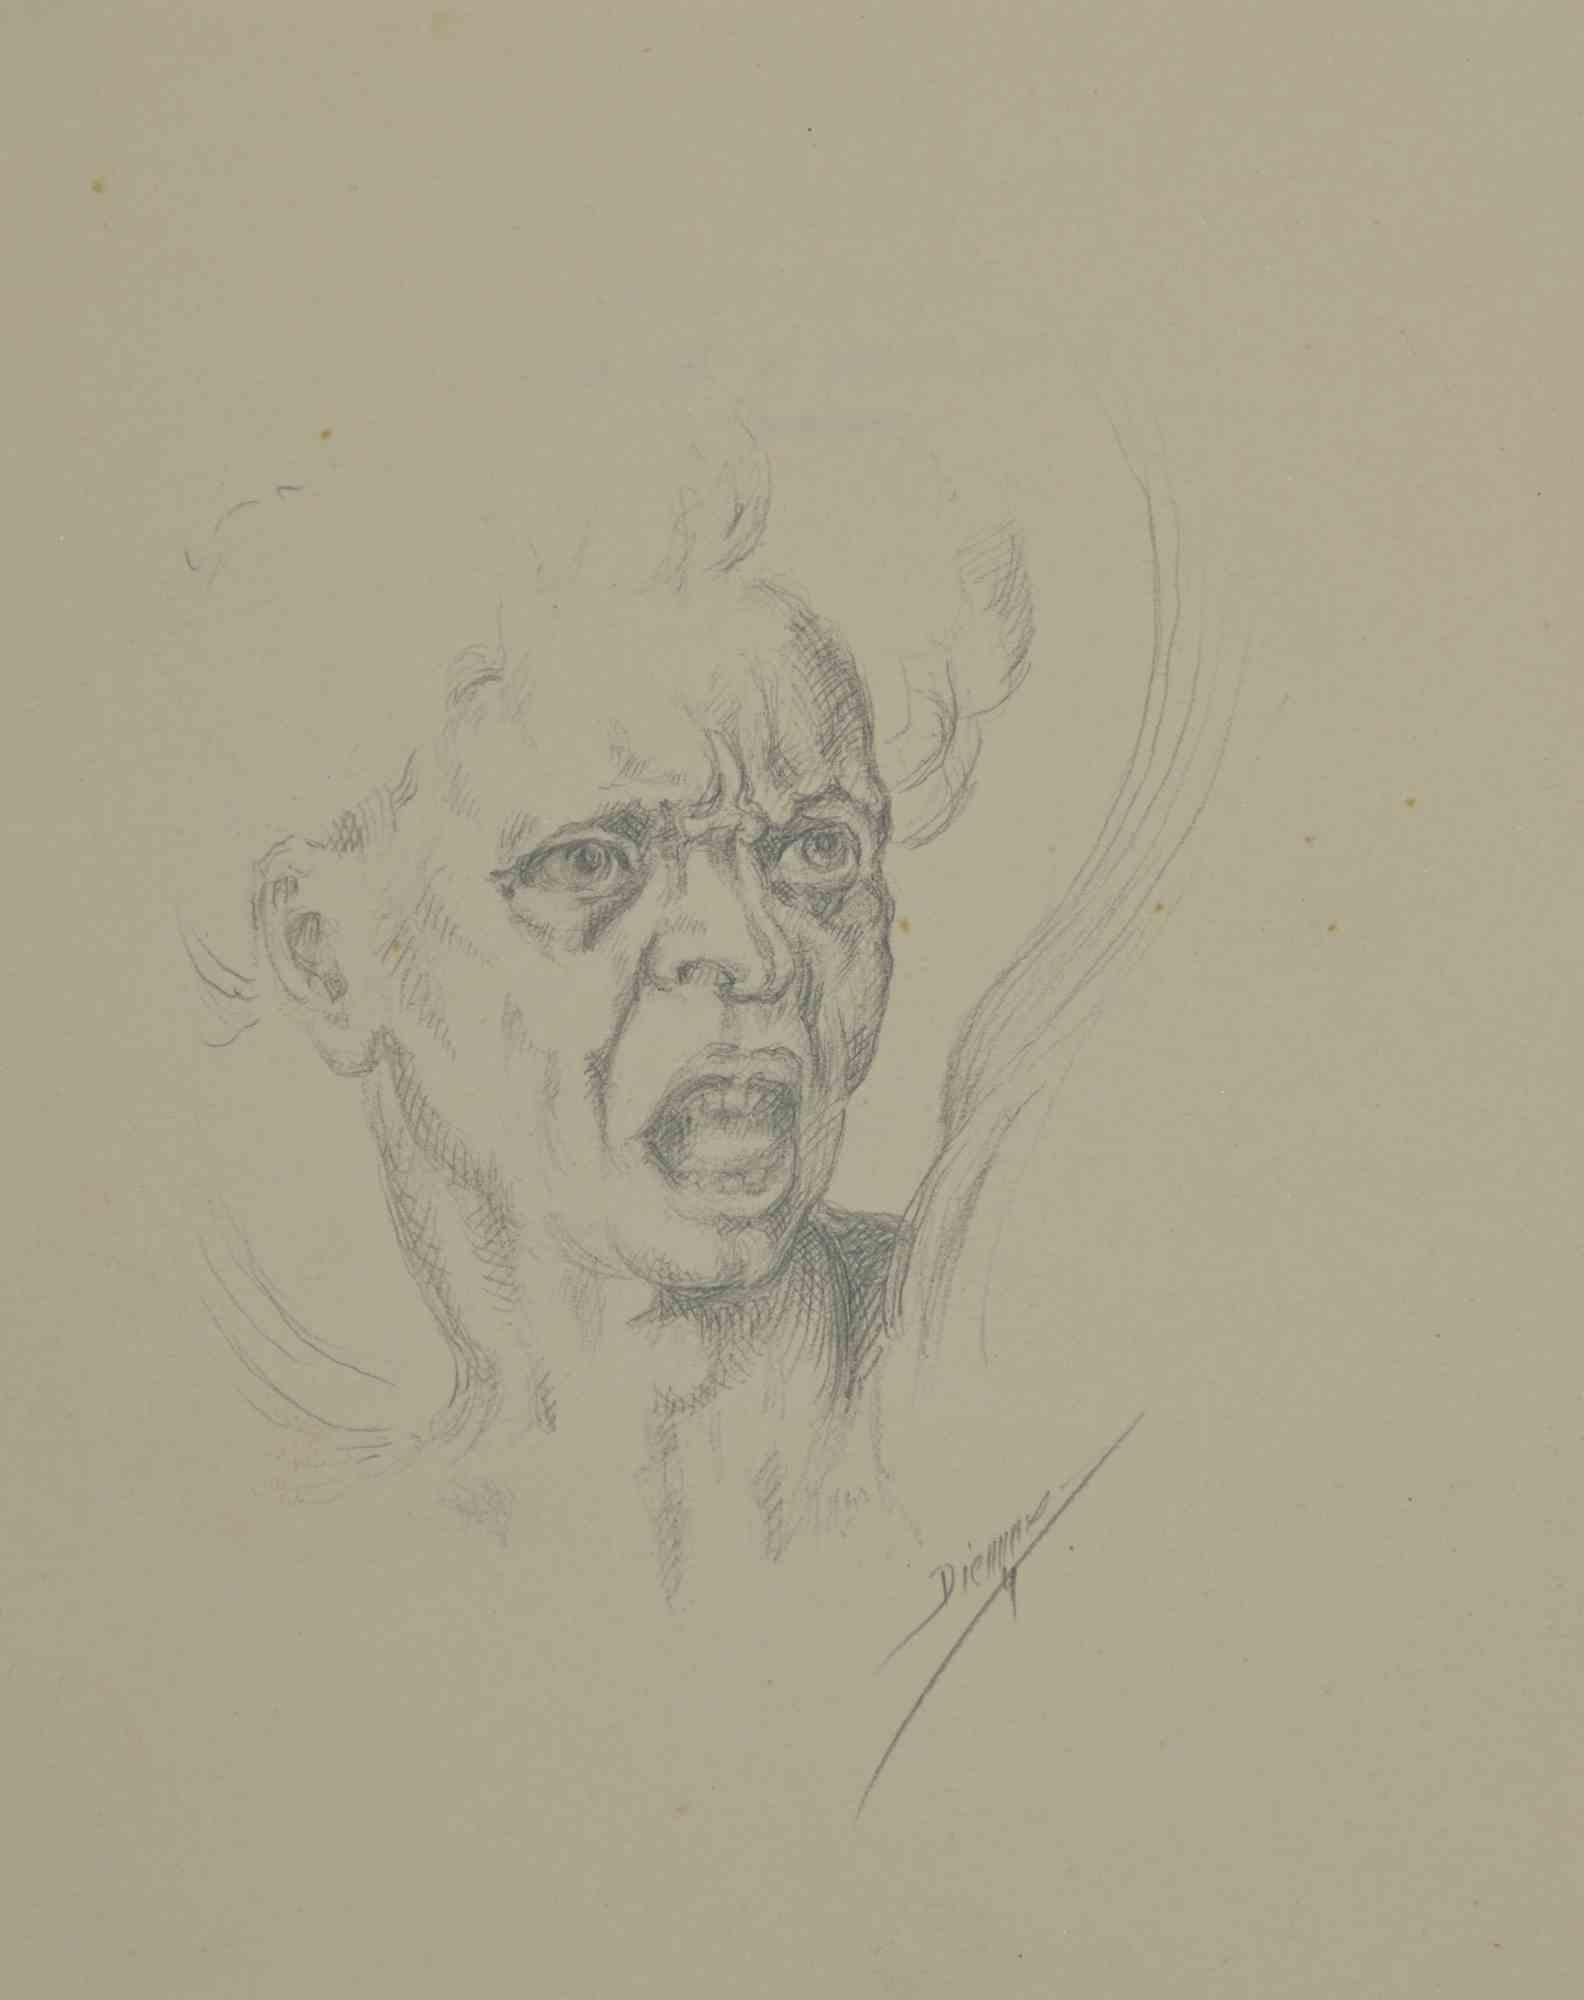 Portrait is a Drawing in pencil realized by Augusto Monari in the Early-20th Century.

Hand-signed on the lower.

Good conditions, including a creamy-colored Passepartout.

The artwork is depicted through confident strokes in a well-balanced